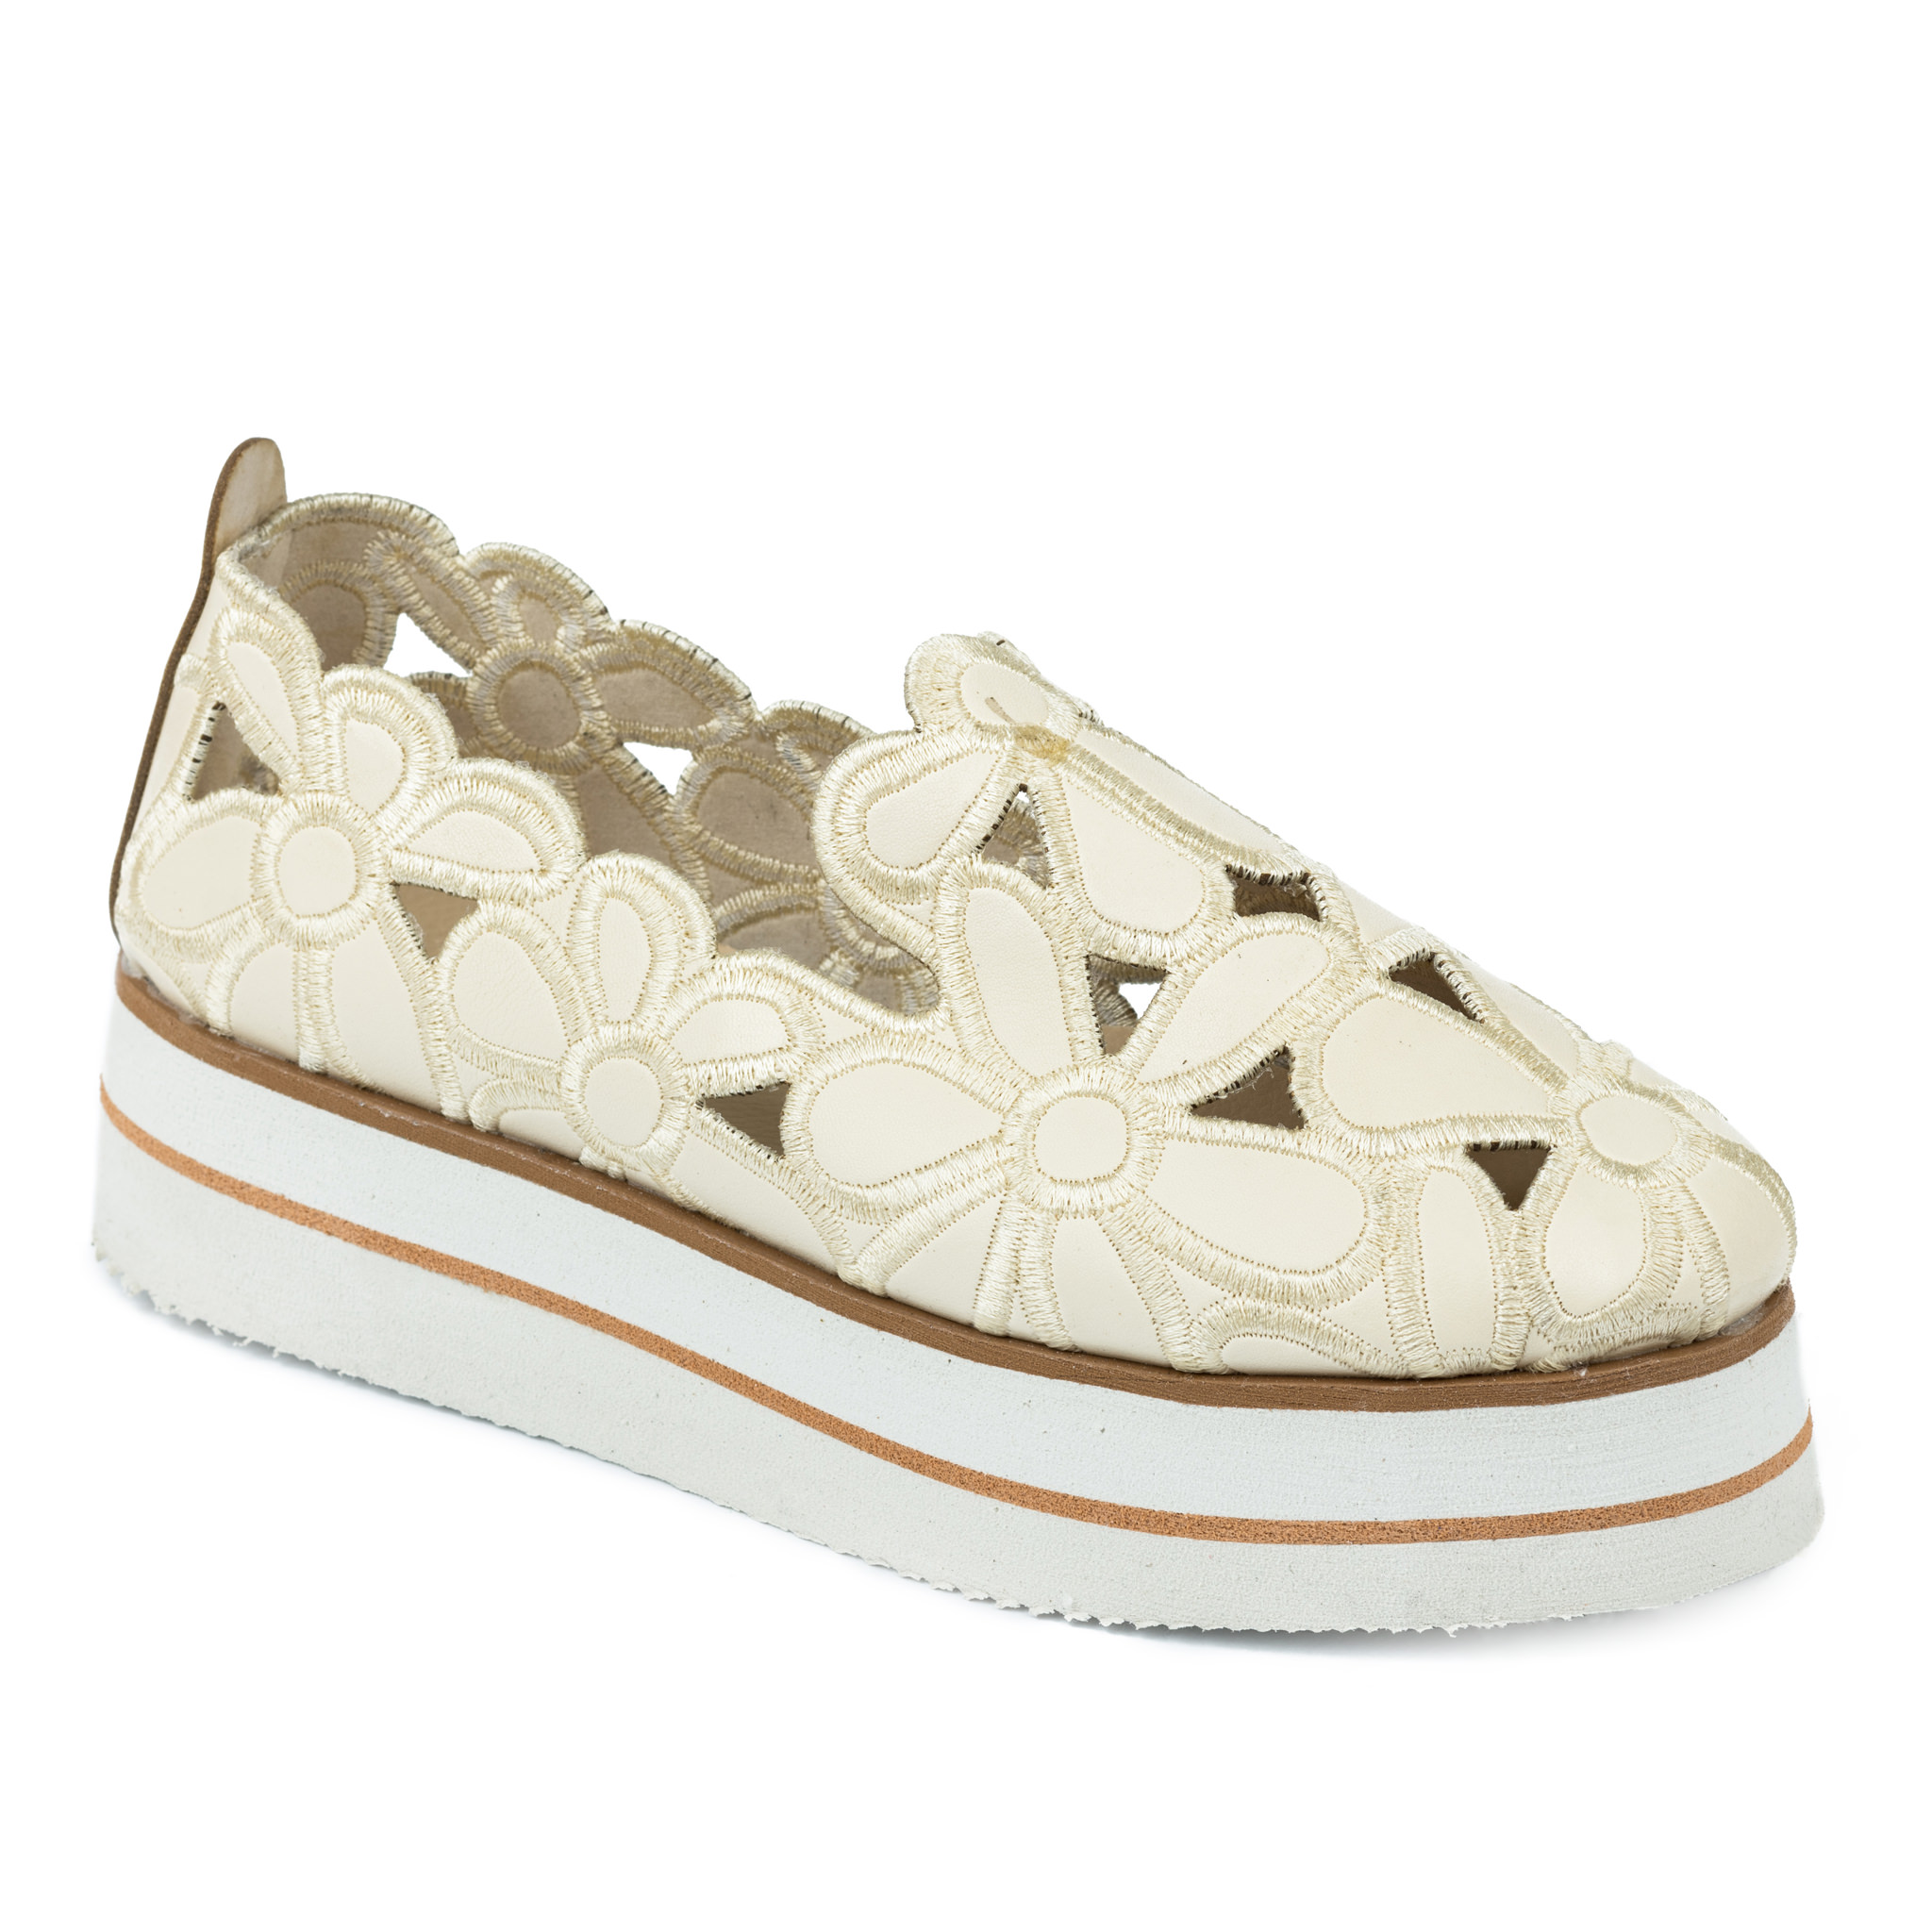 HIGH SOLE SHOES WITH FLOWER PRINT - BEIGE